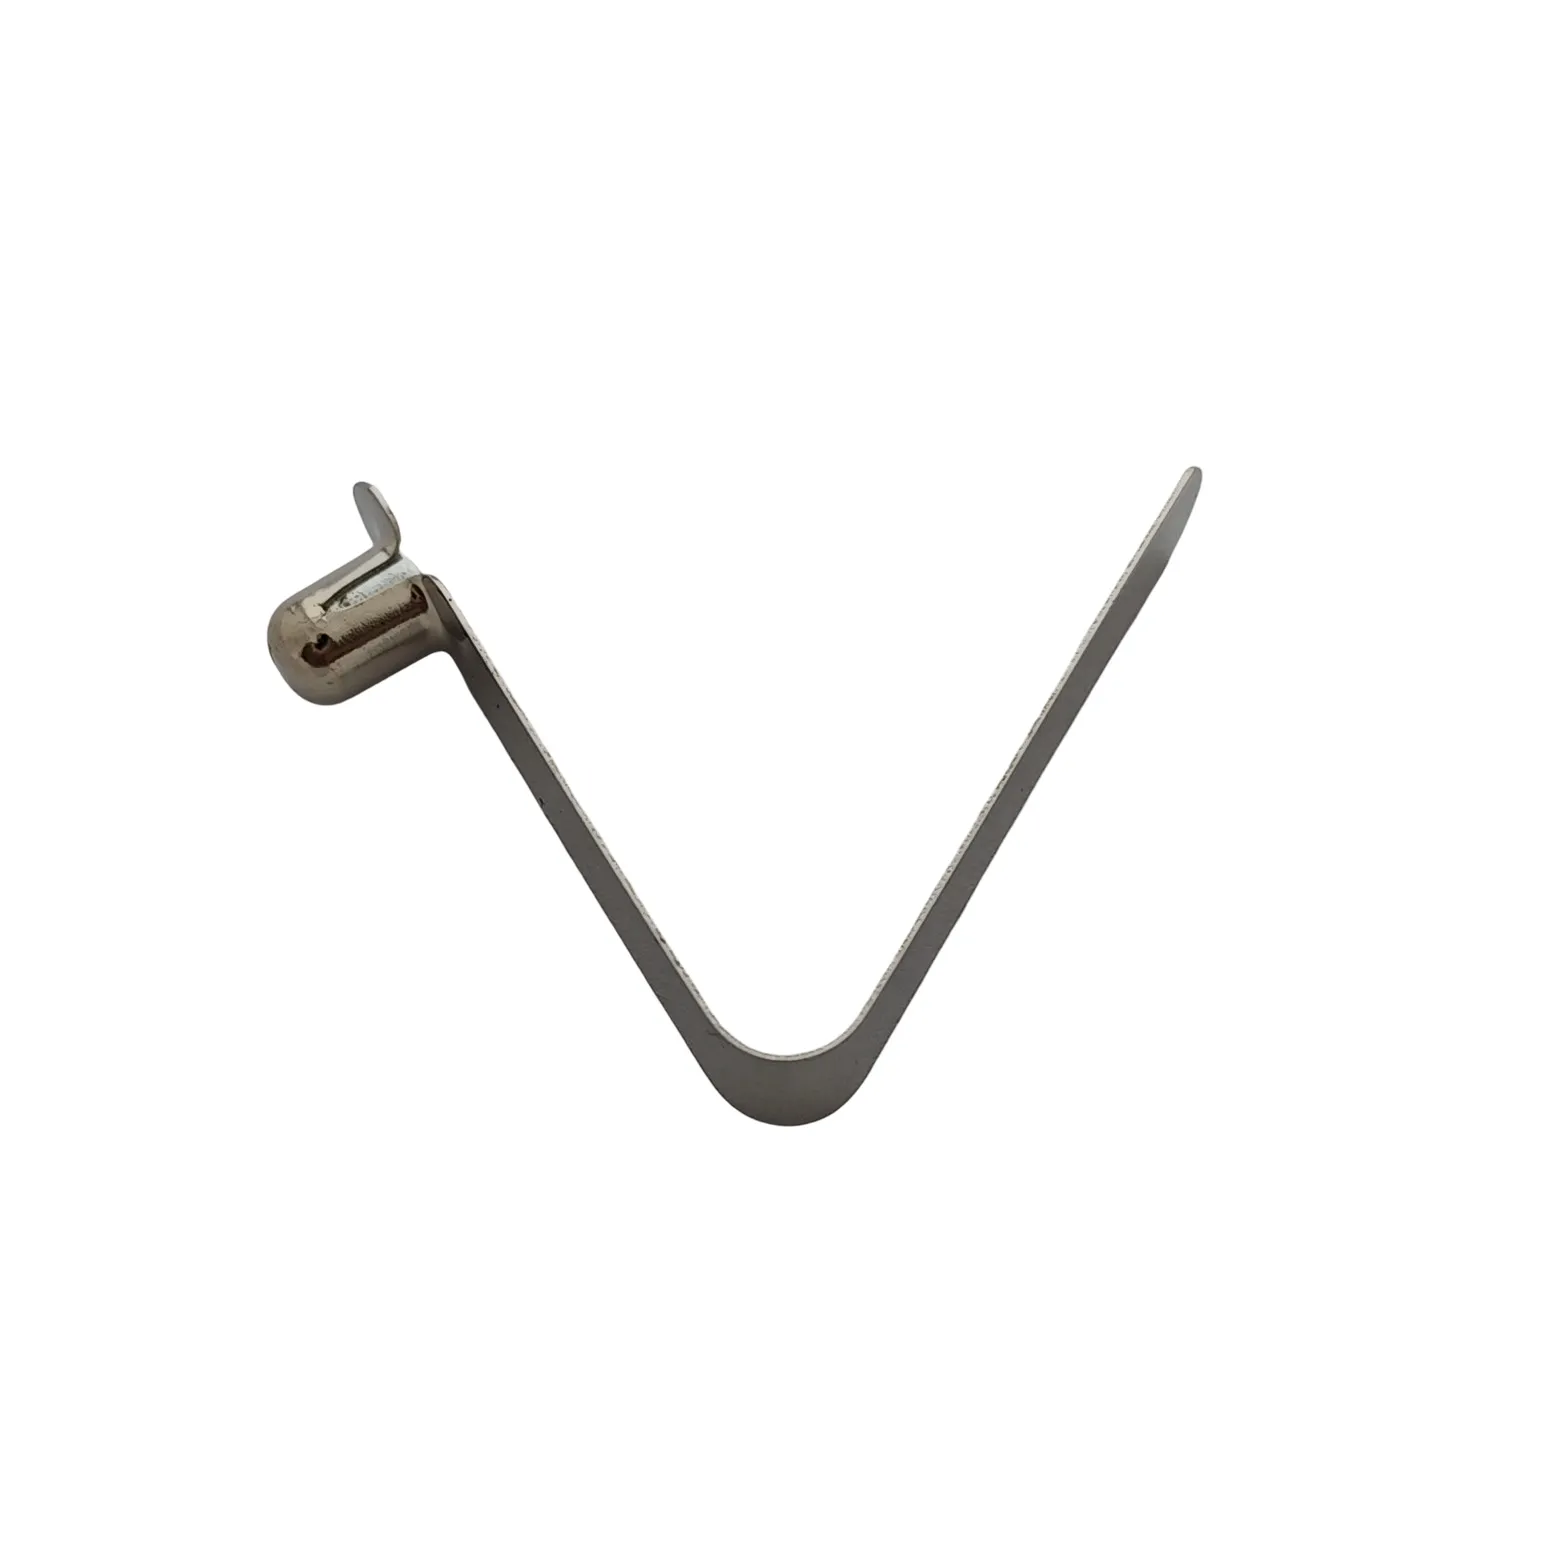 65 manganese steel nickel plated V-shaped spring tube internal expansion and positioning